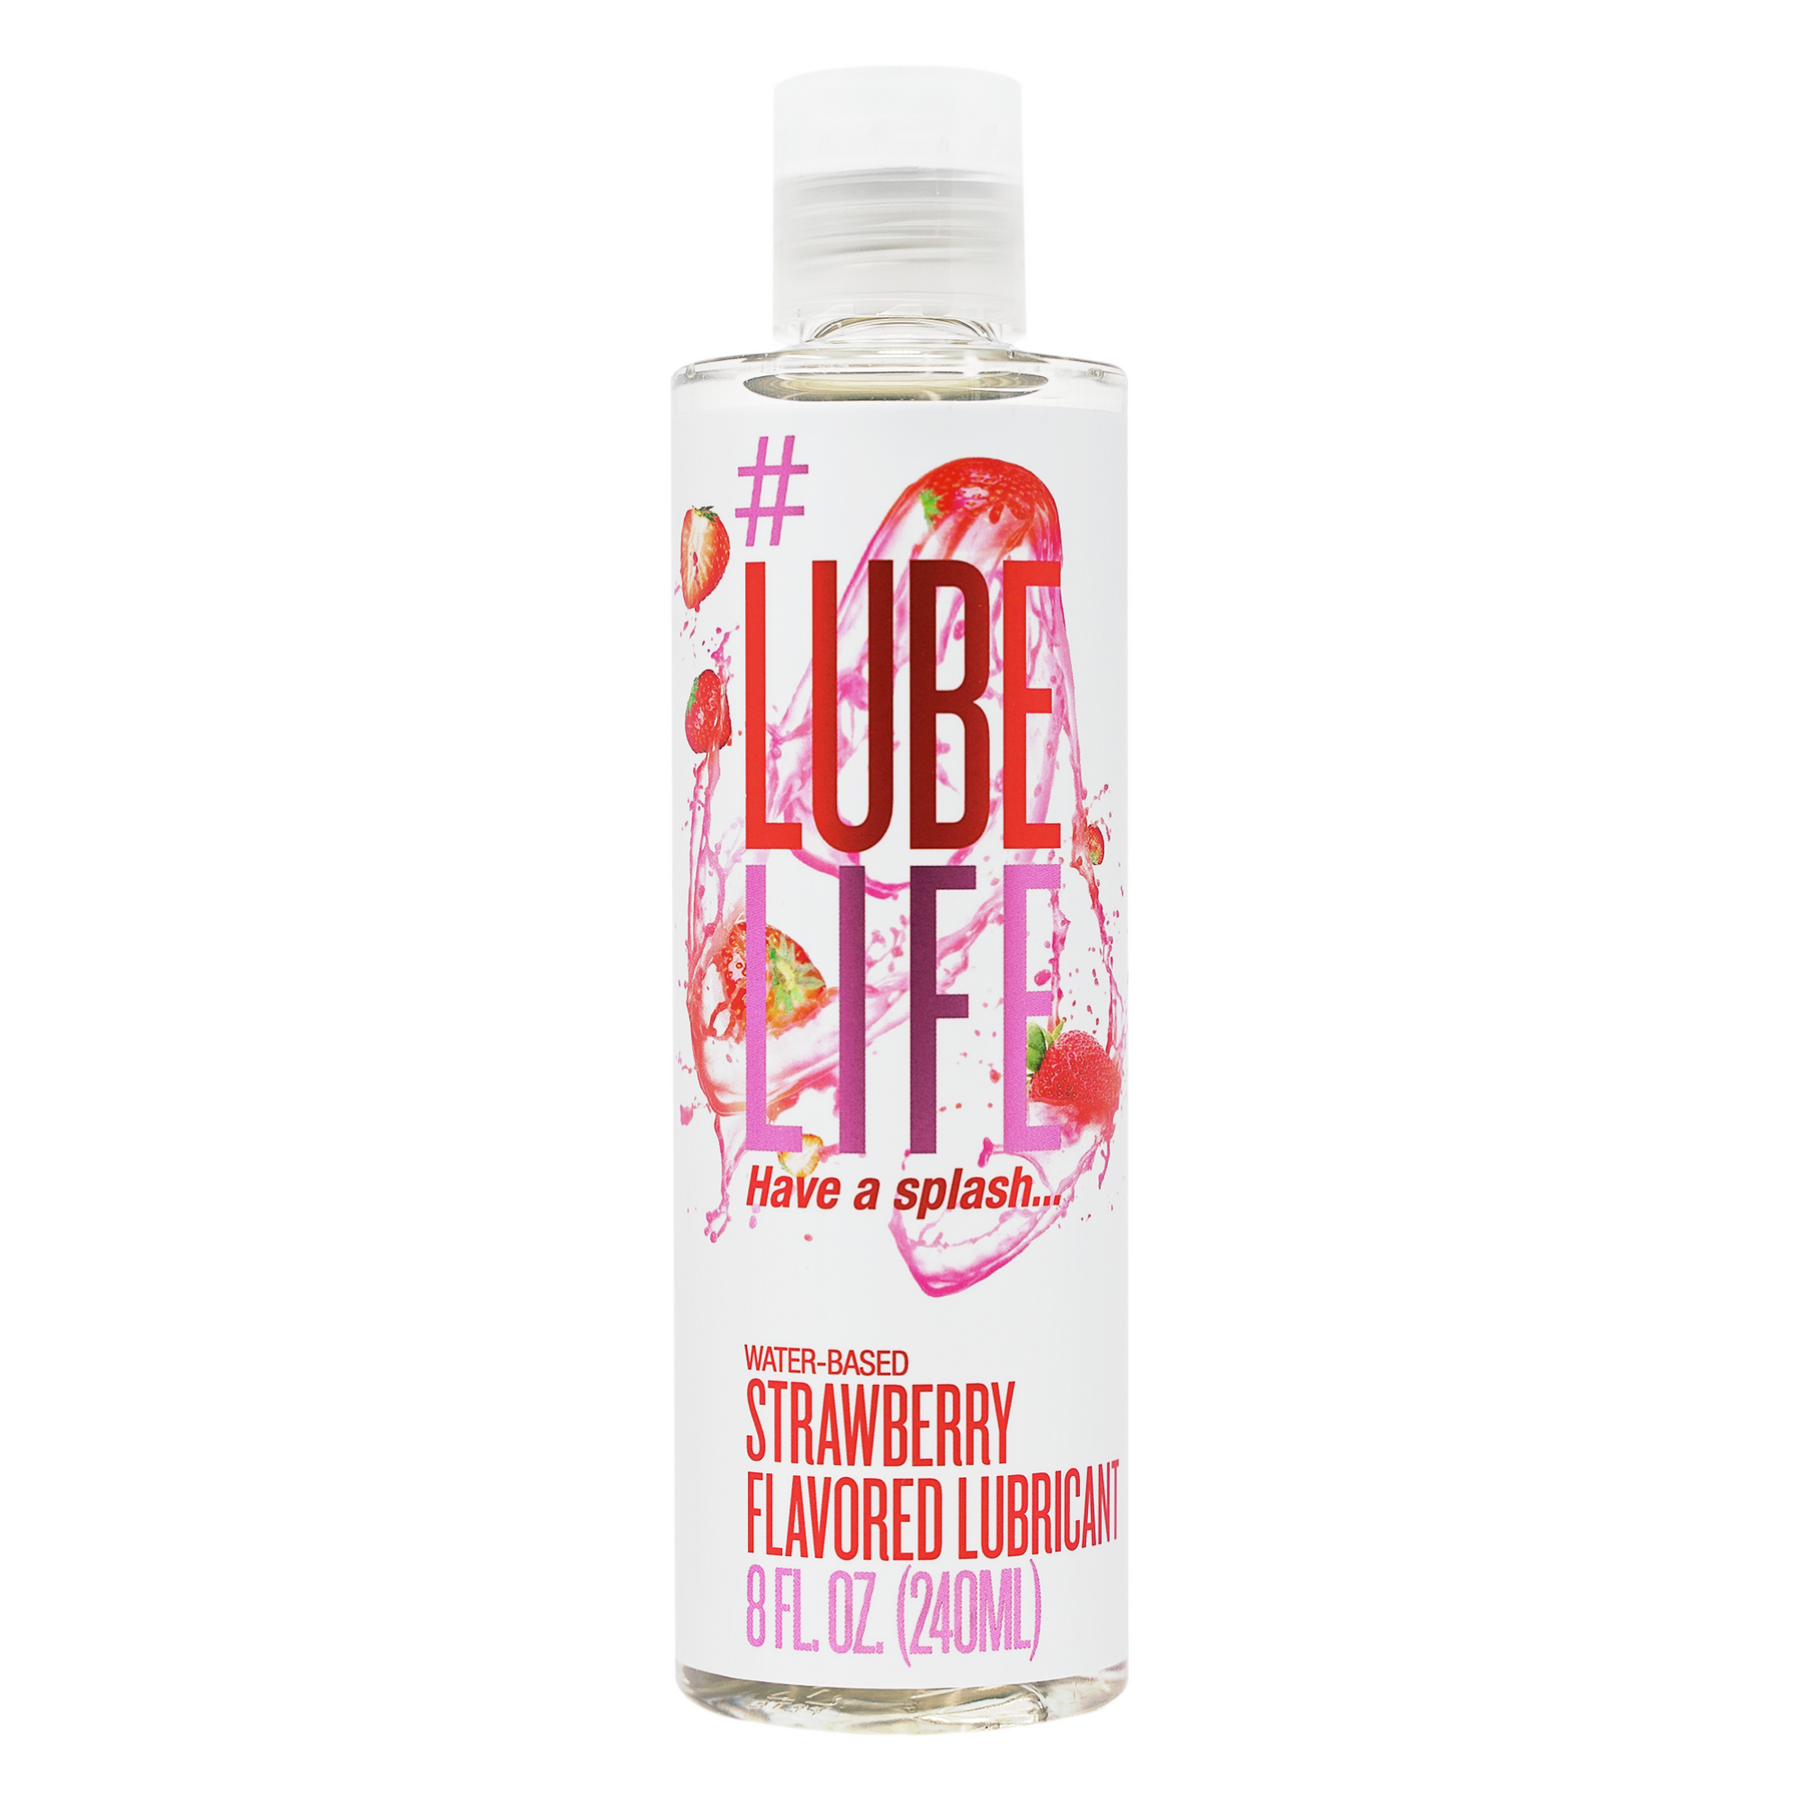 Lube Life Water Based Warming Lubricant for Men, Women and Couples